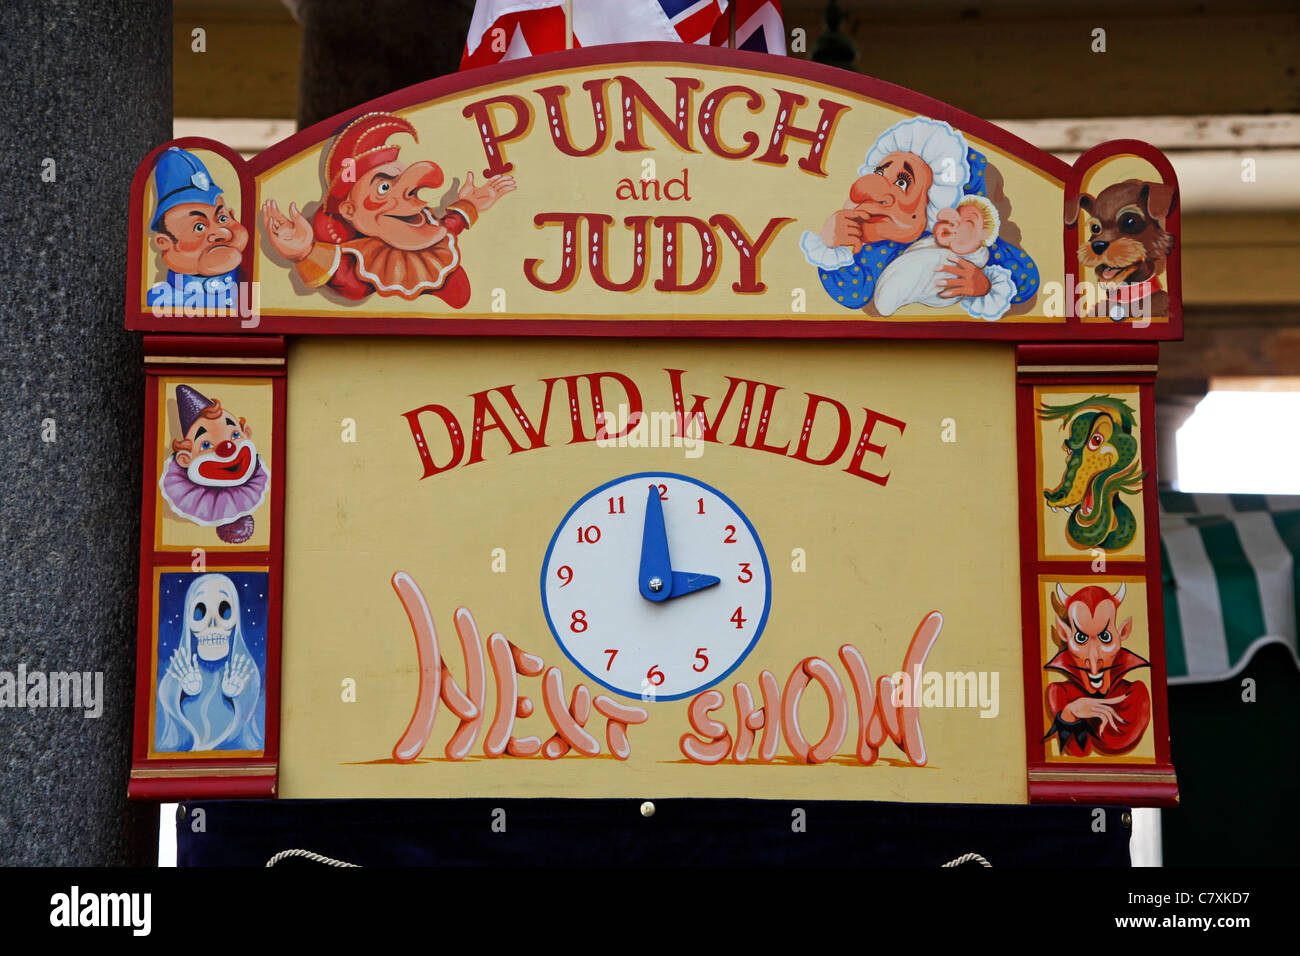 Punch and Judy Show Stock Photo